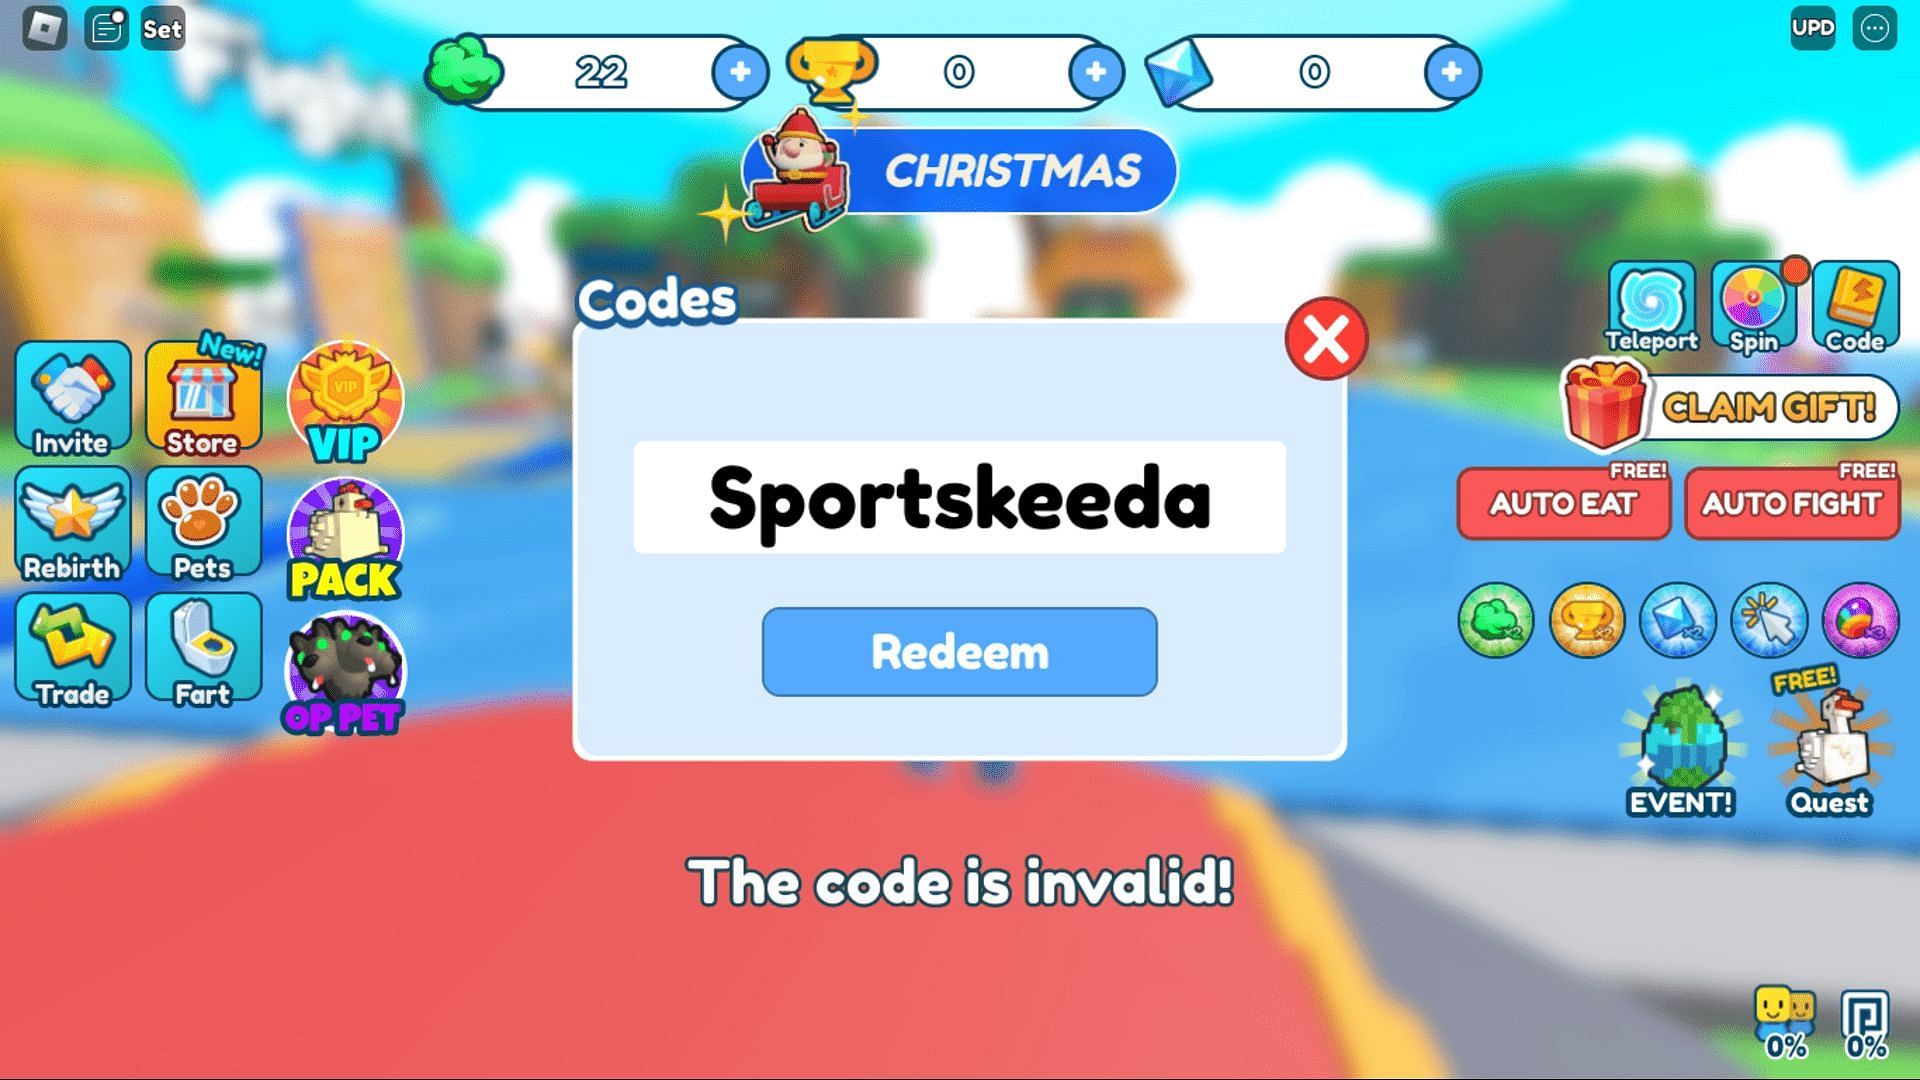 Troubleshoot codes in Fart a Friend with ease (Image via Roblox)